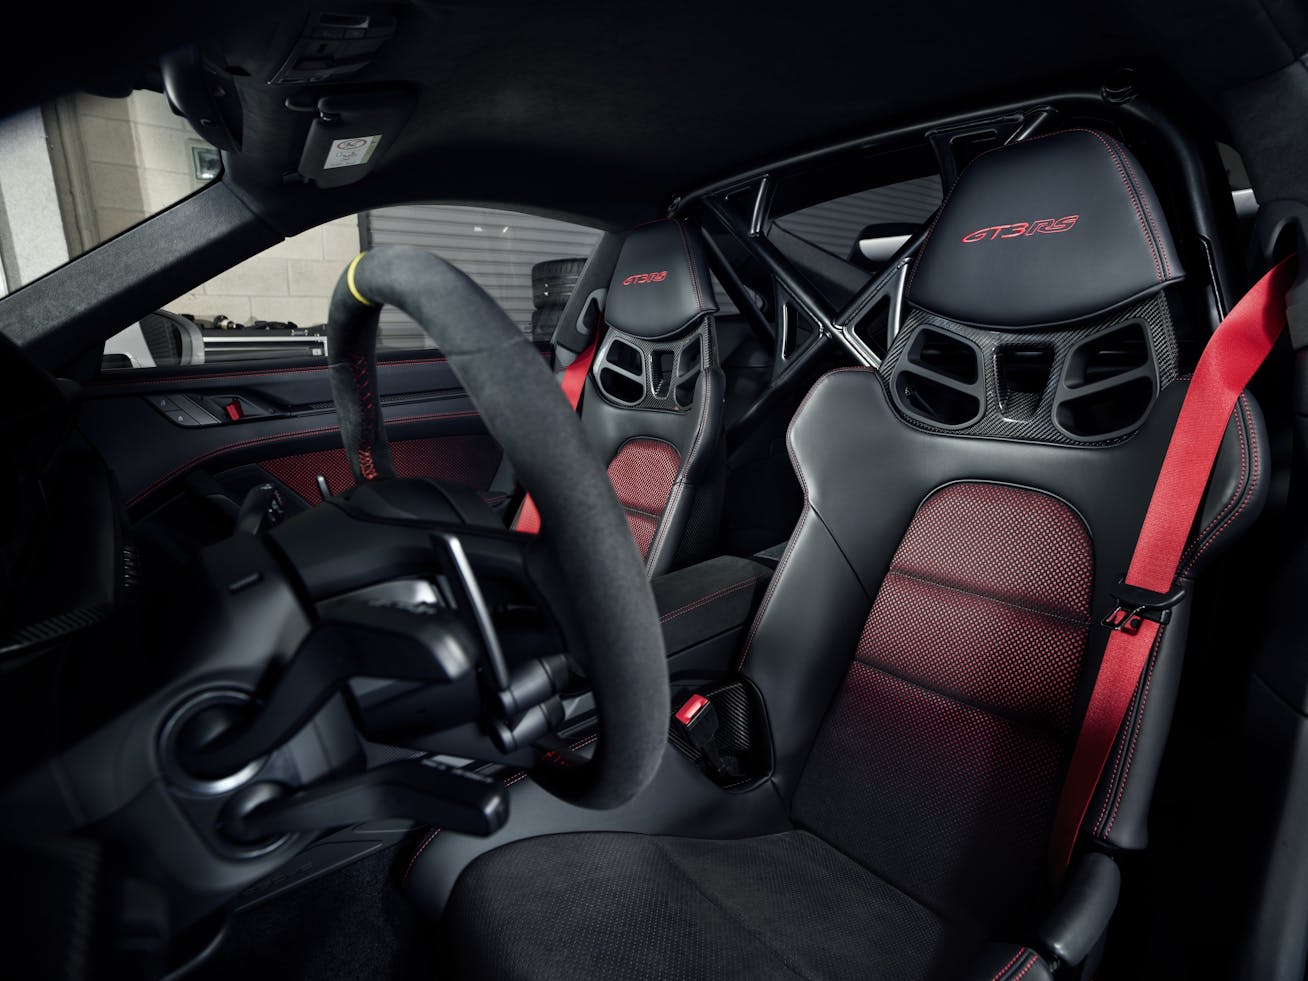 911 GT3 RS cockpit in black and red materials